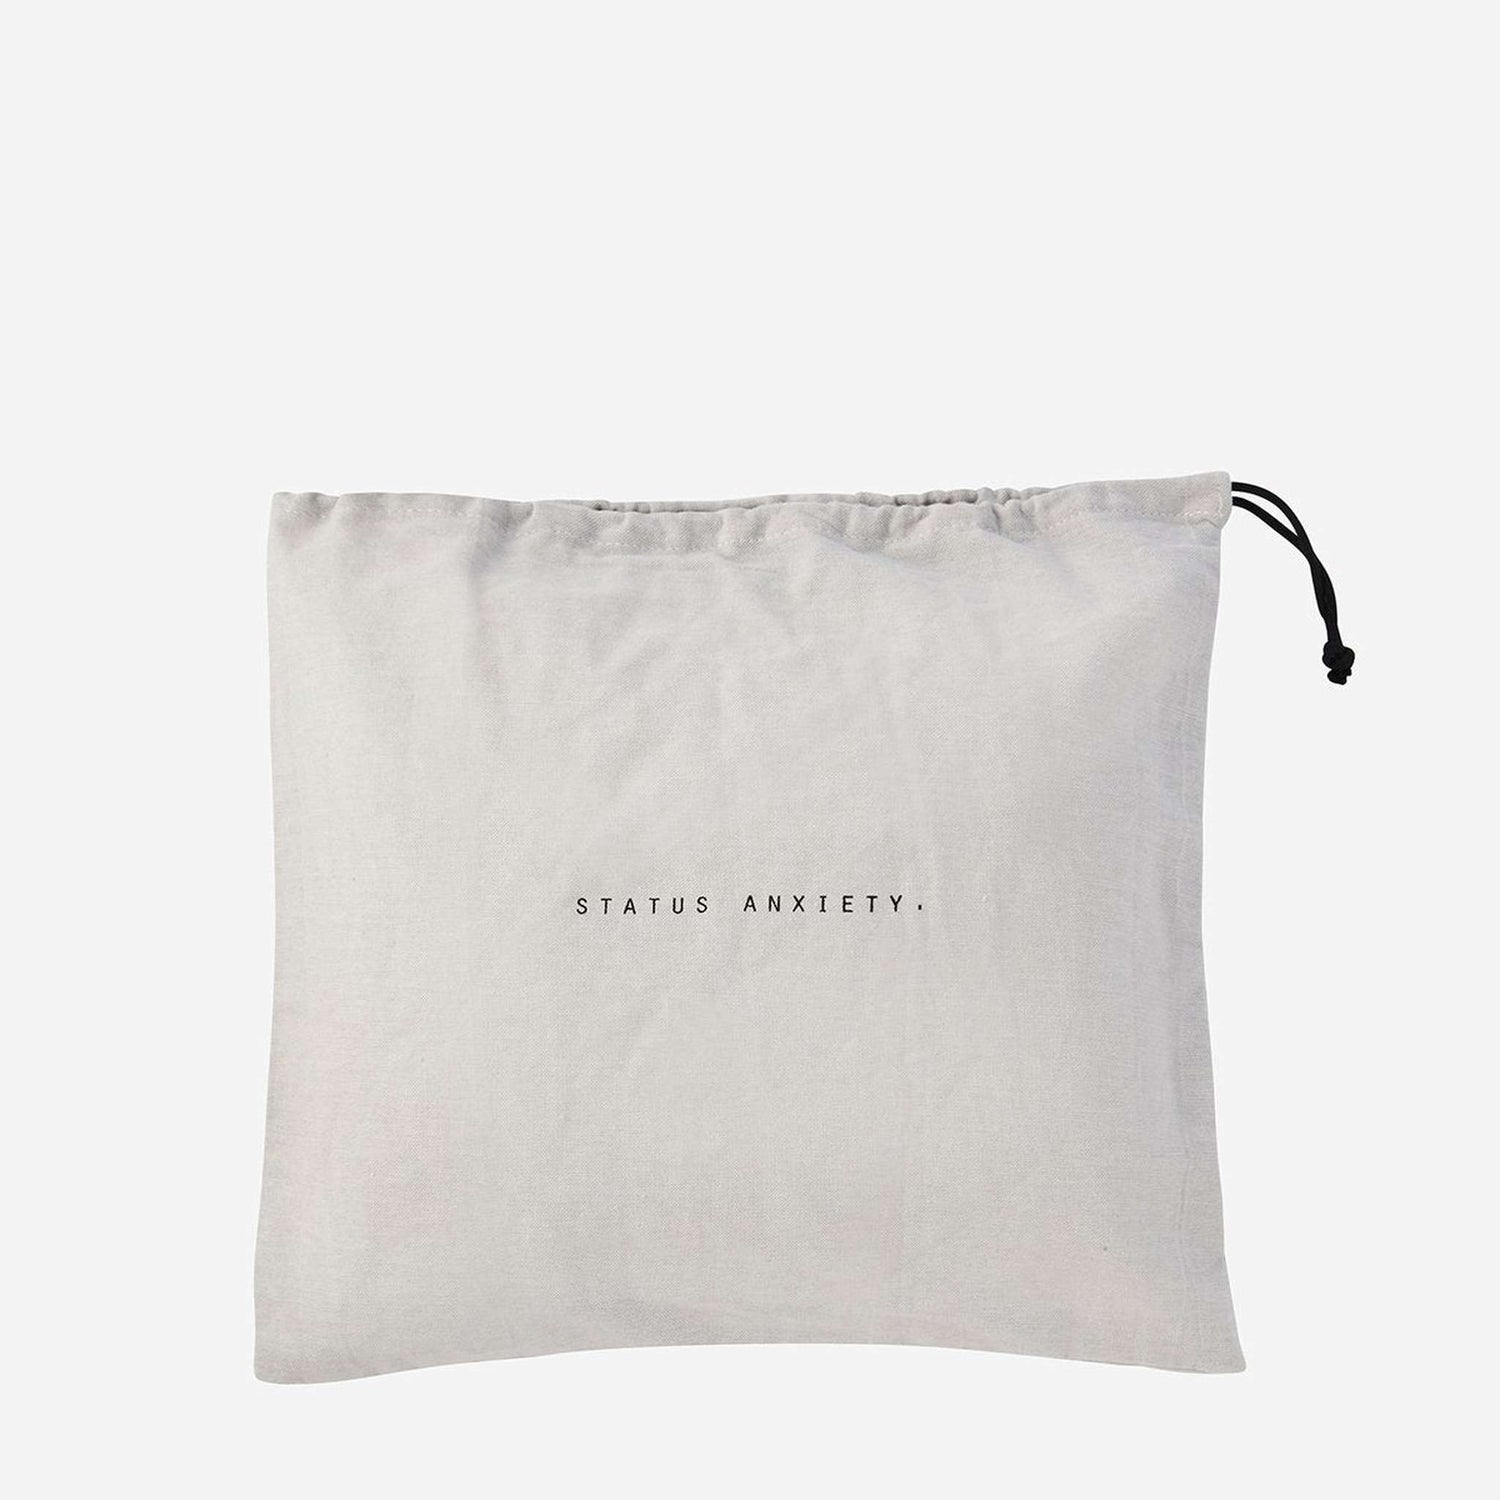 status anxiety dust cover bag